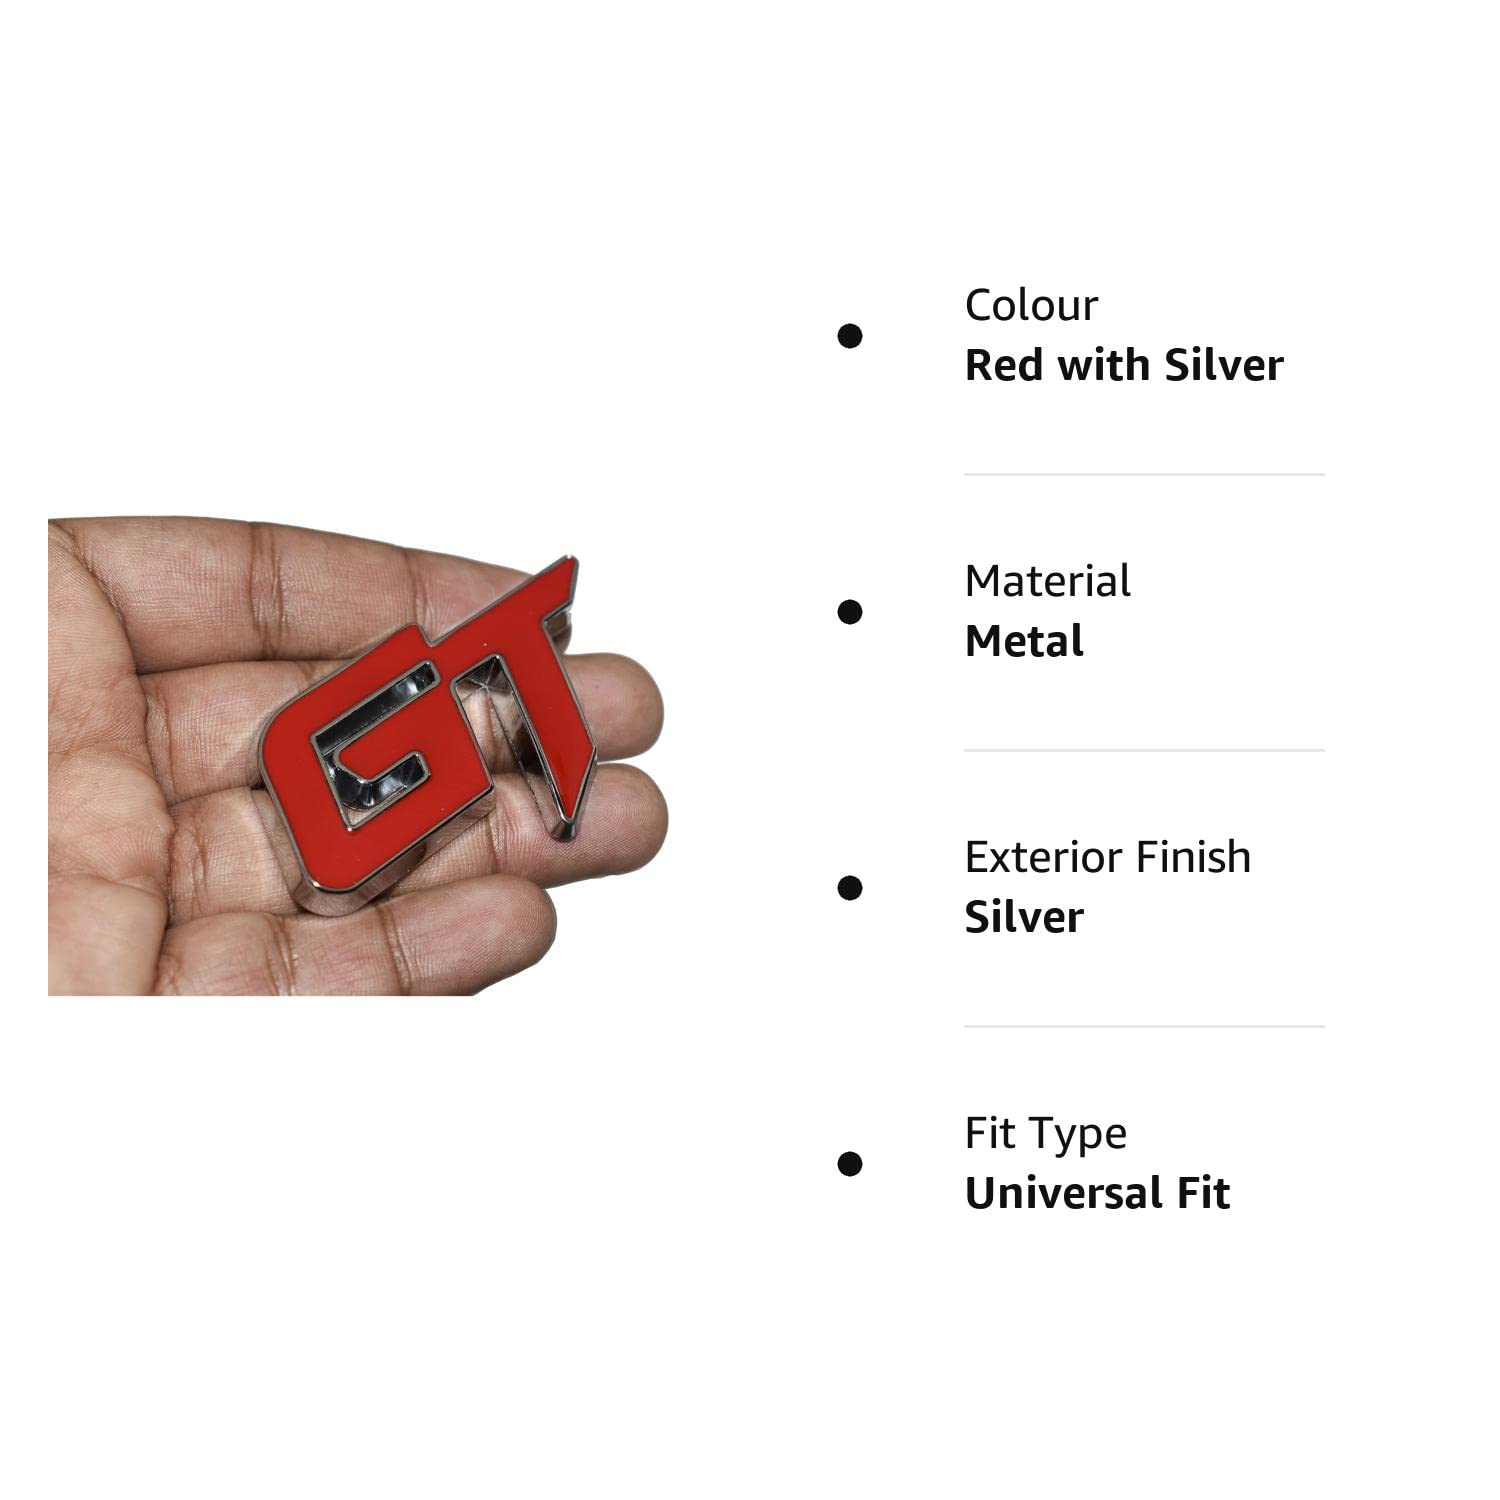 GT Car Badge 3D Logo Metal Emblem Automotive Sticker Decal Flexes to Cars, Motorcycles, Laptops, Windows, Any Smooth Surface 6 cm X 3.8 cm Red & Silver